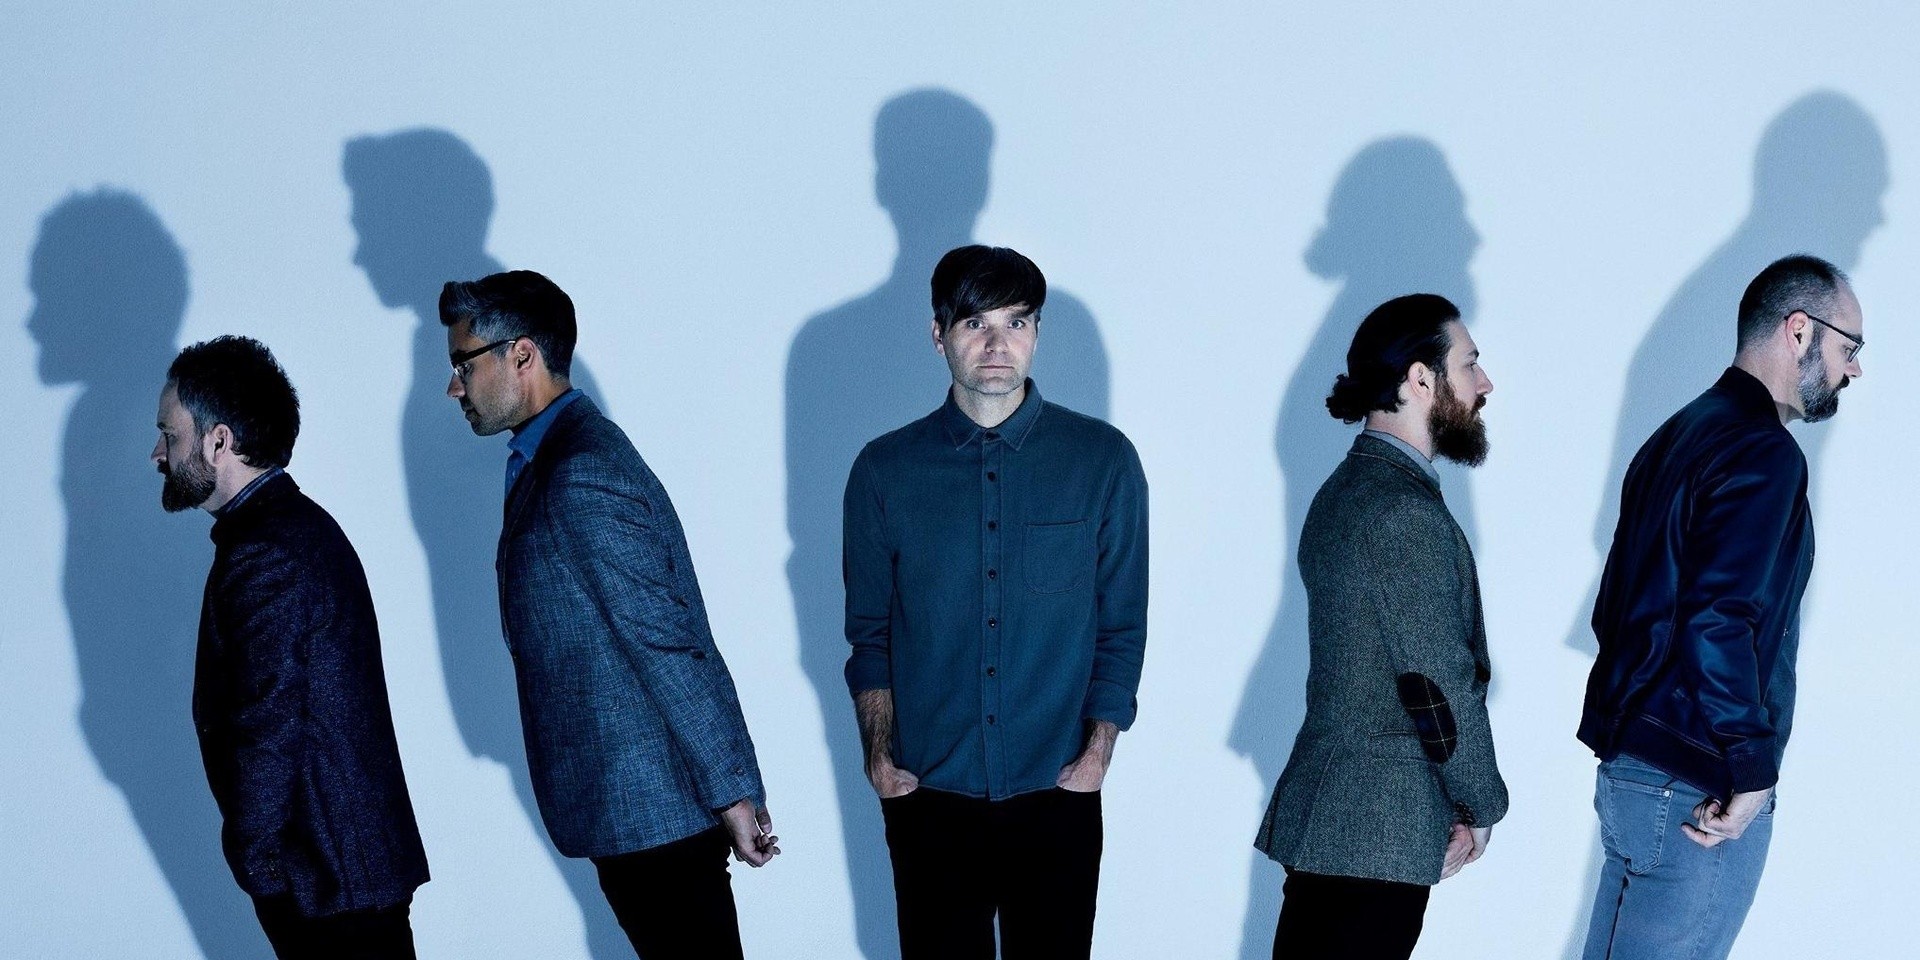 Death Cab For Cutie release new song 'Gold Rush' off upcoming album – listen